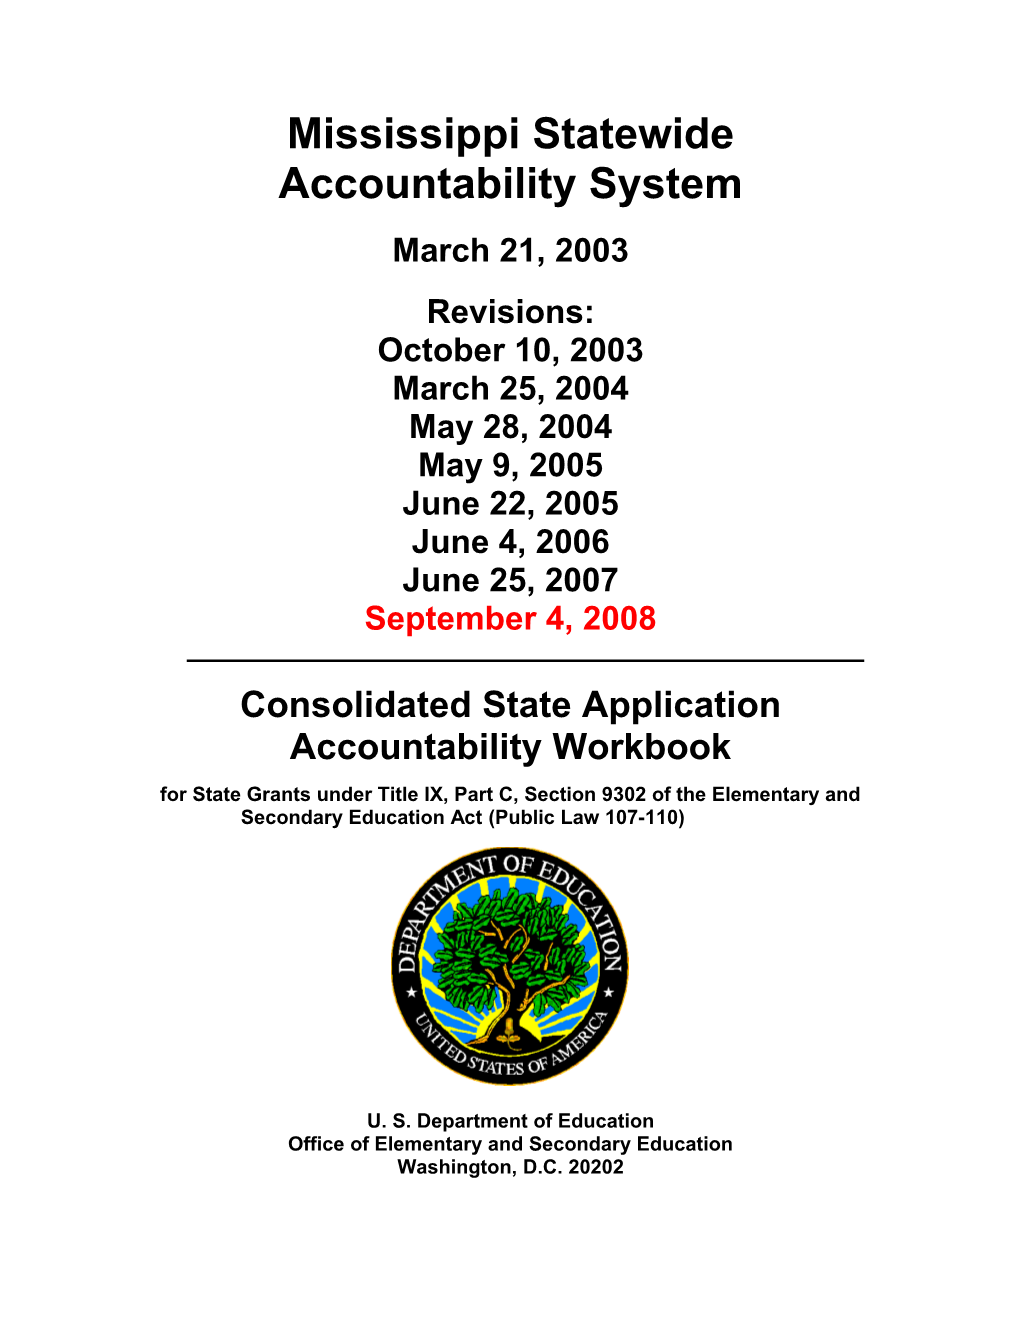 Mississippi Consolidated State Application Accountability Workbook (MS WORD)